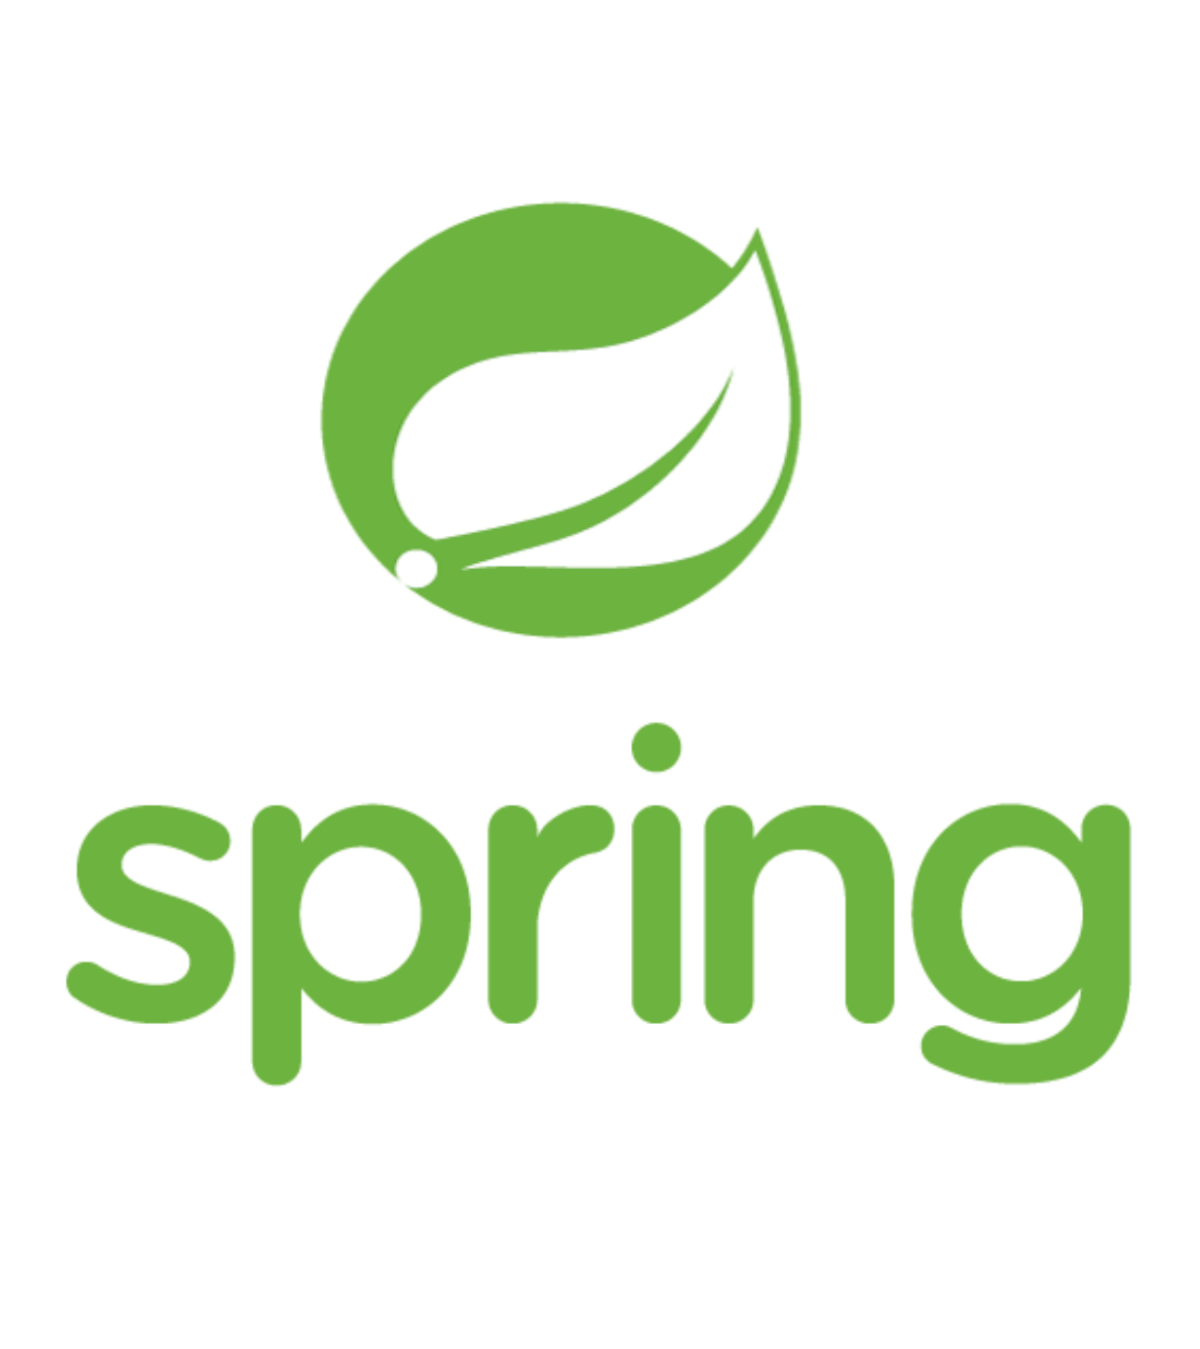 code examples and answer to questions in Spring framework in Java